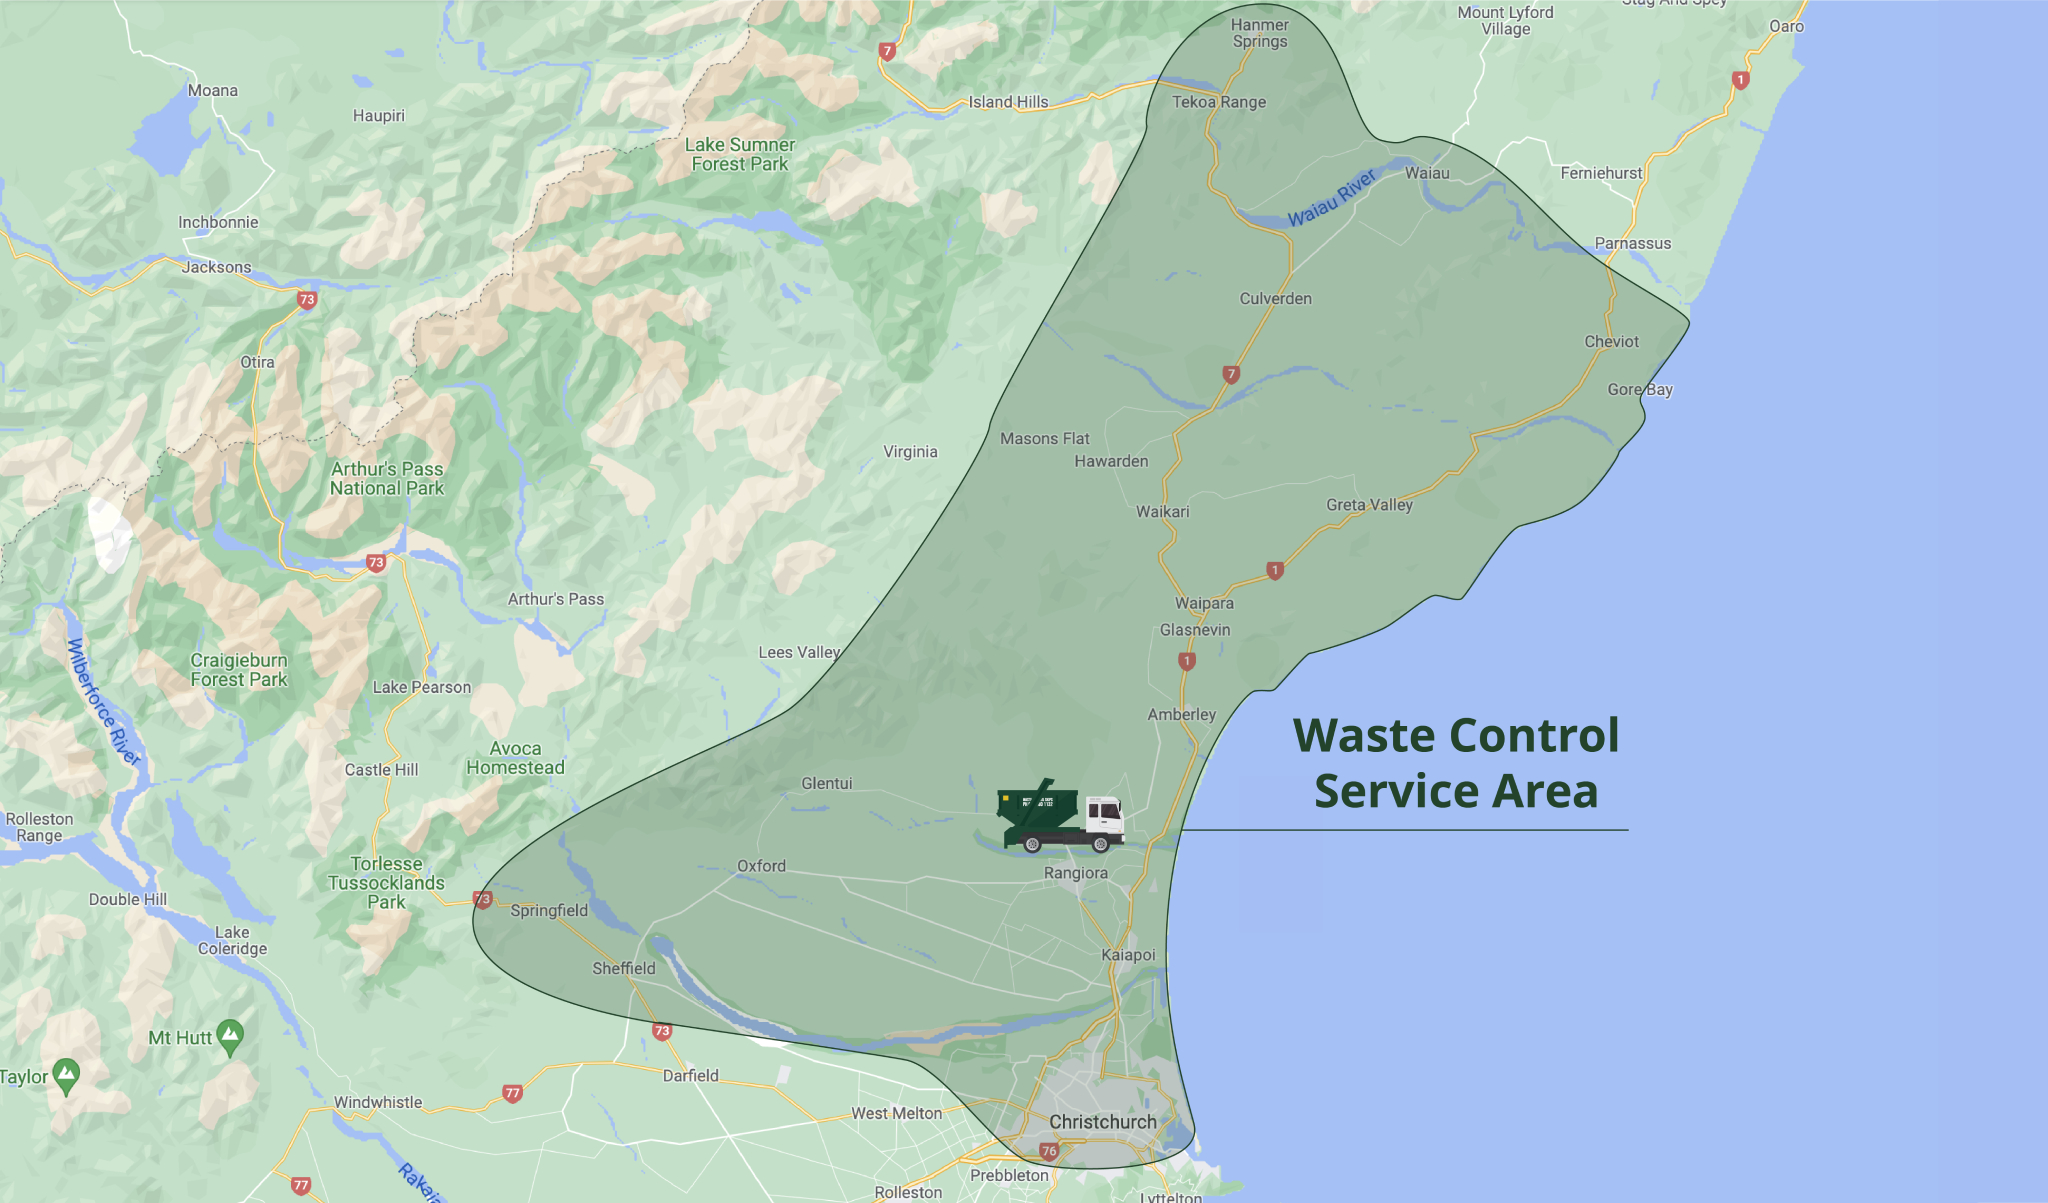 From Kaiapoi to Loburn to Sefton, find a skip bin hire option near you with Waste Control Skips